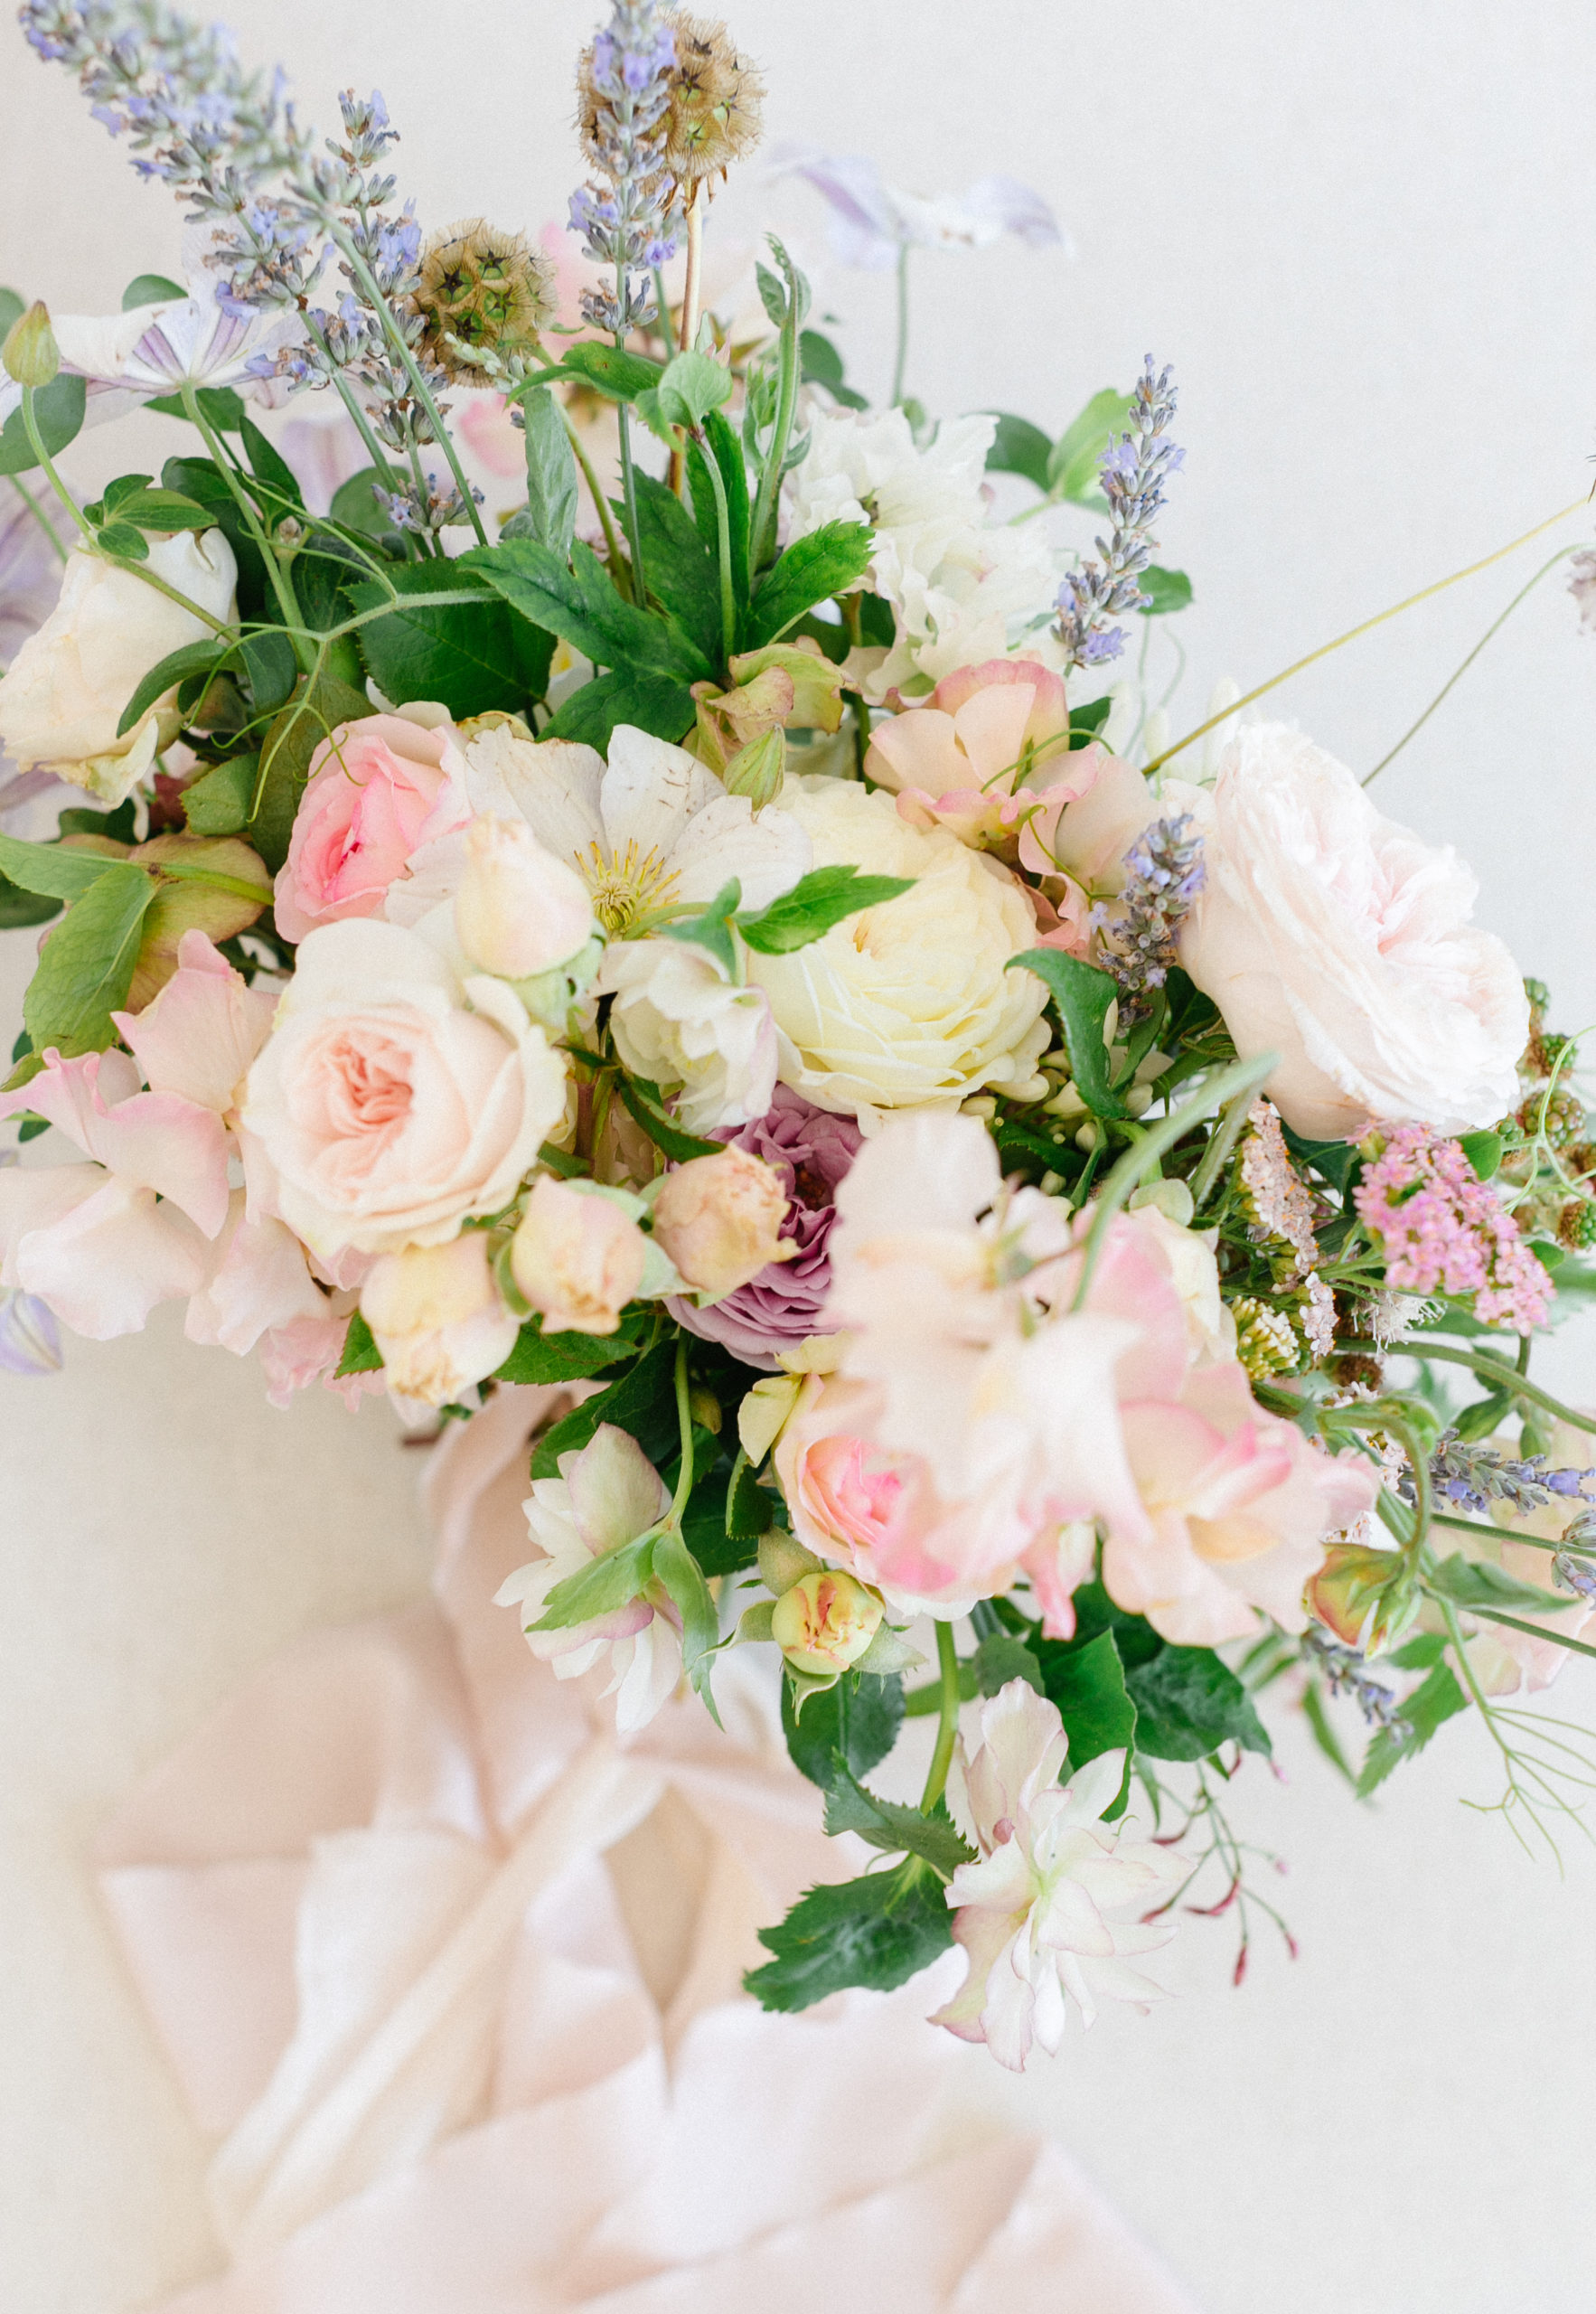 COVID's Impact on Wedding Flower Costs & Why It's Staying